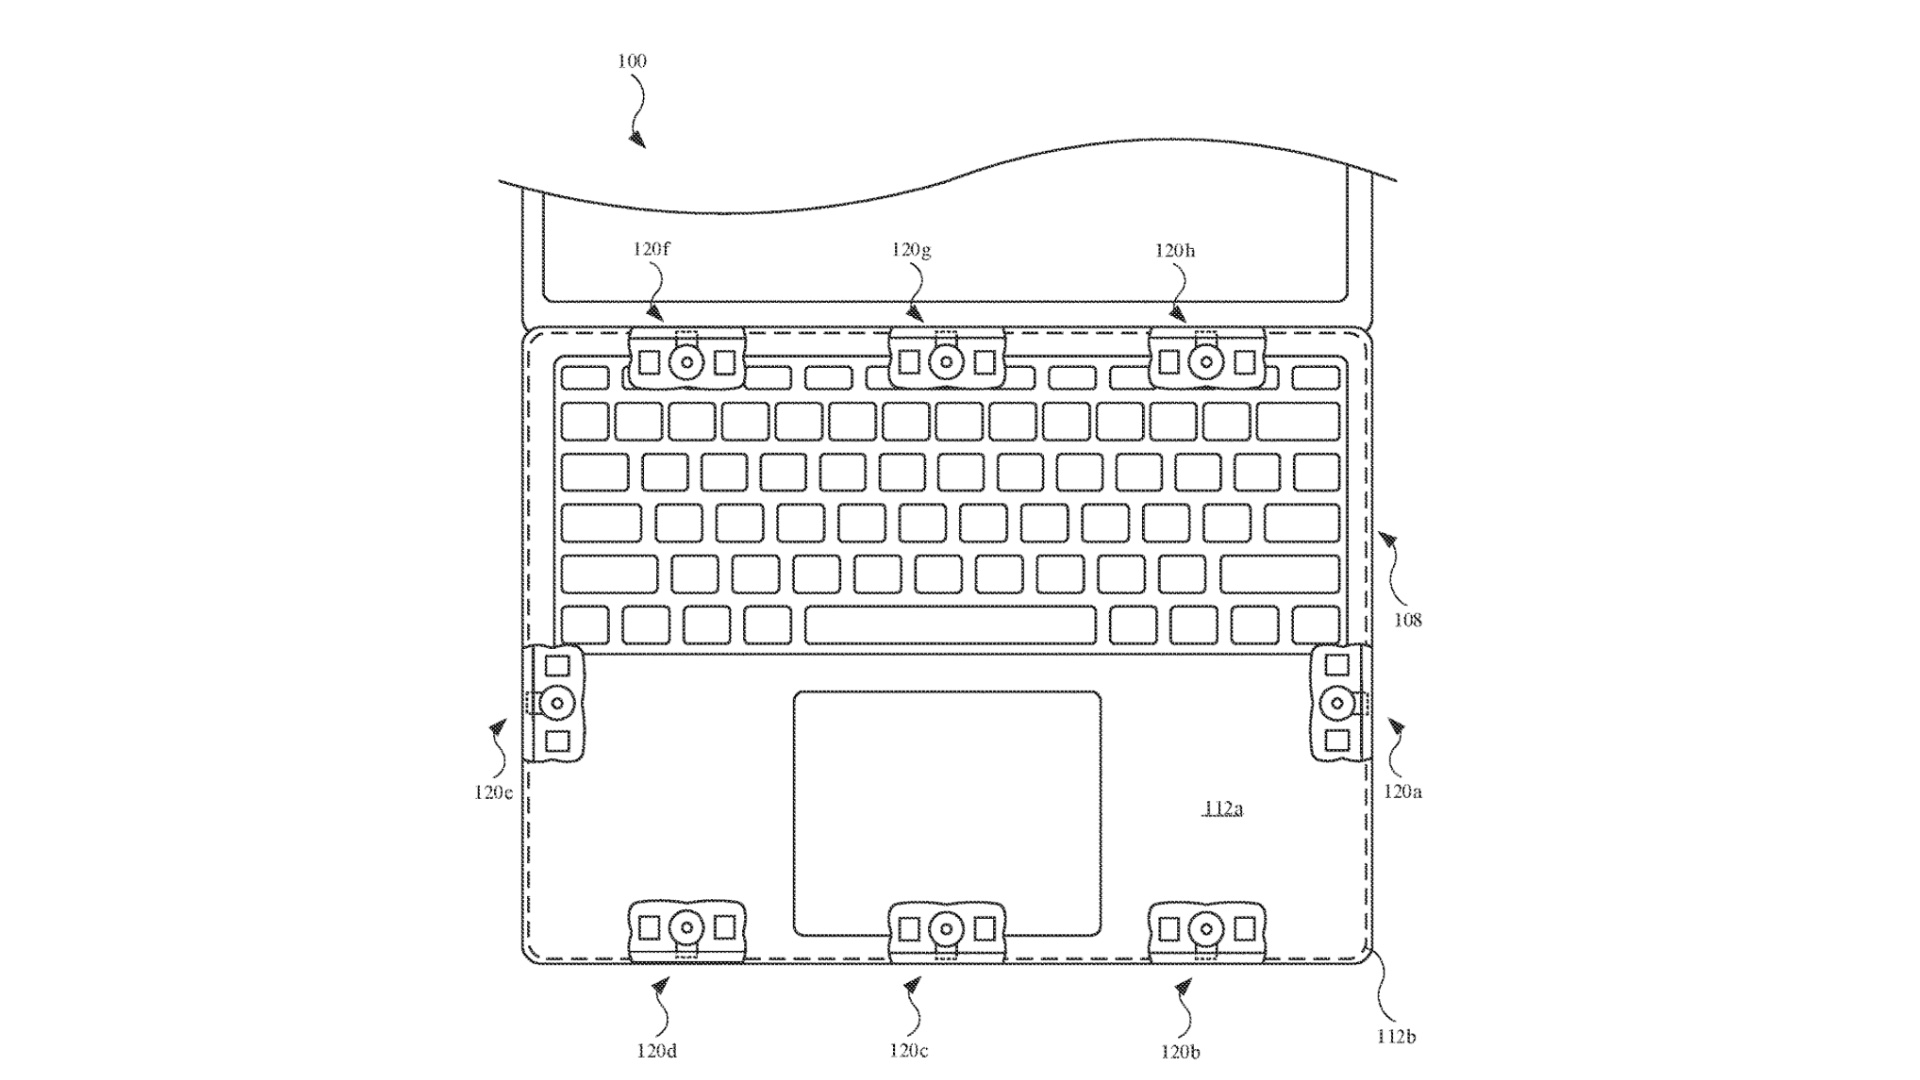 MacBook patent drawing showing a keyboard